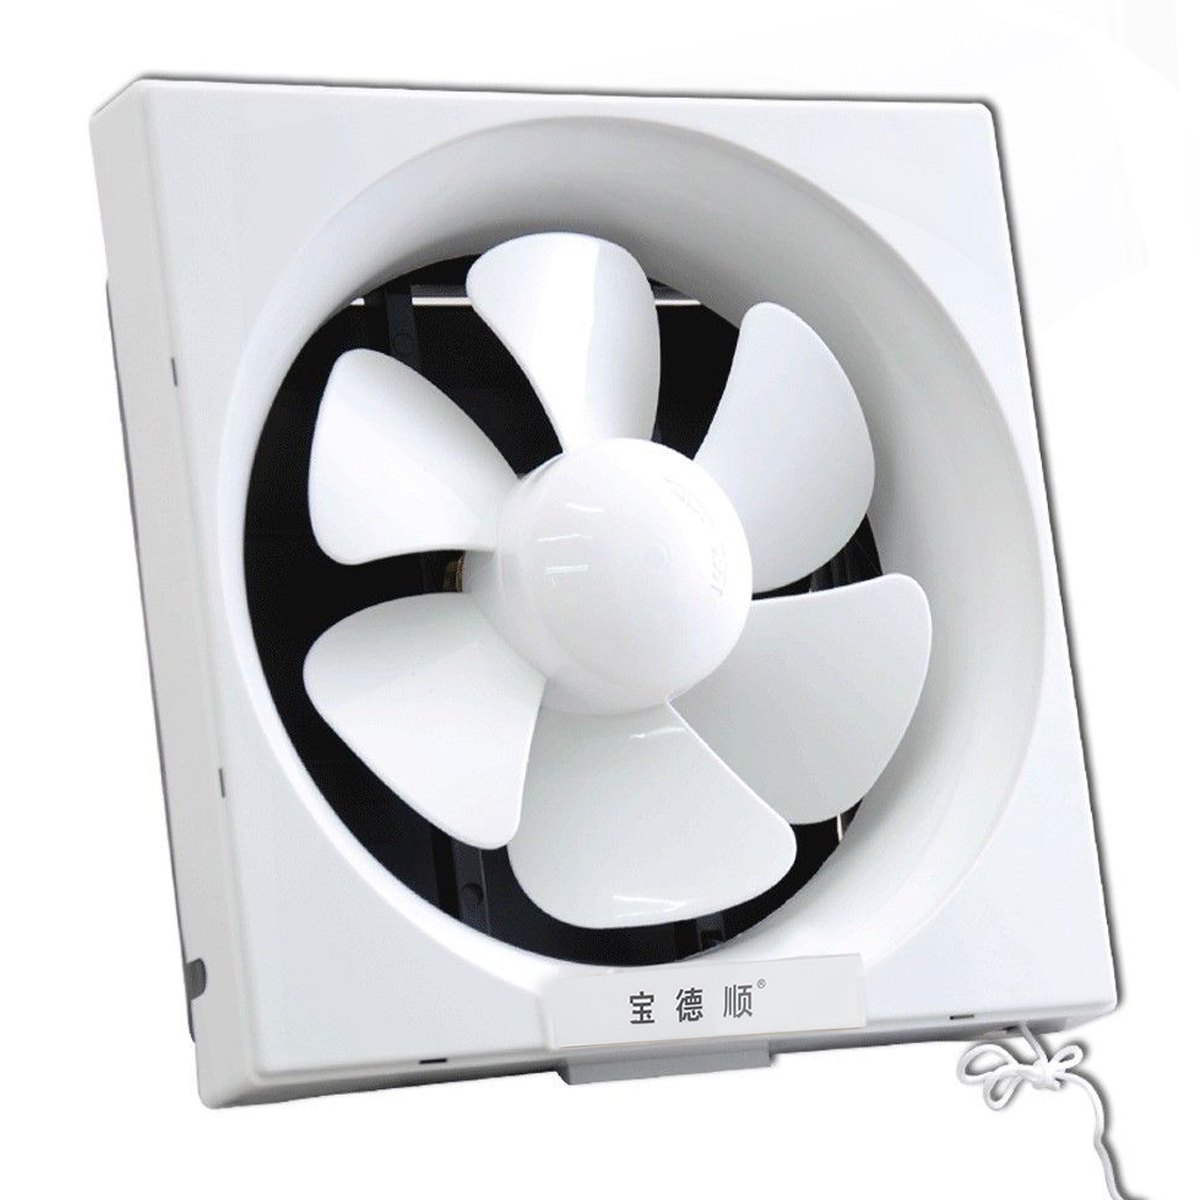 Powerful-Low-Noise-Ventilation-Extractor-Exhaust-Fan-Shutter-for-Bathroo-1348667-7